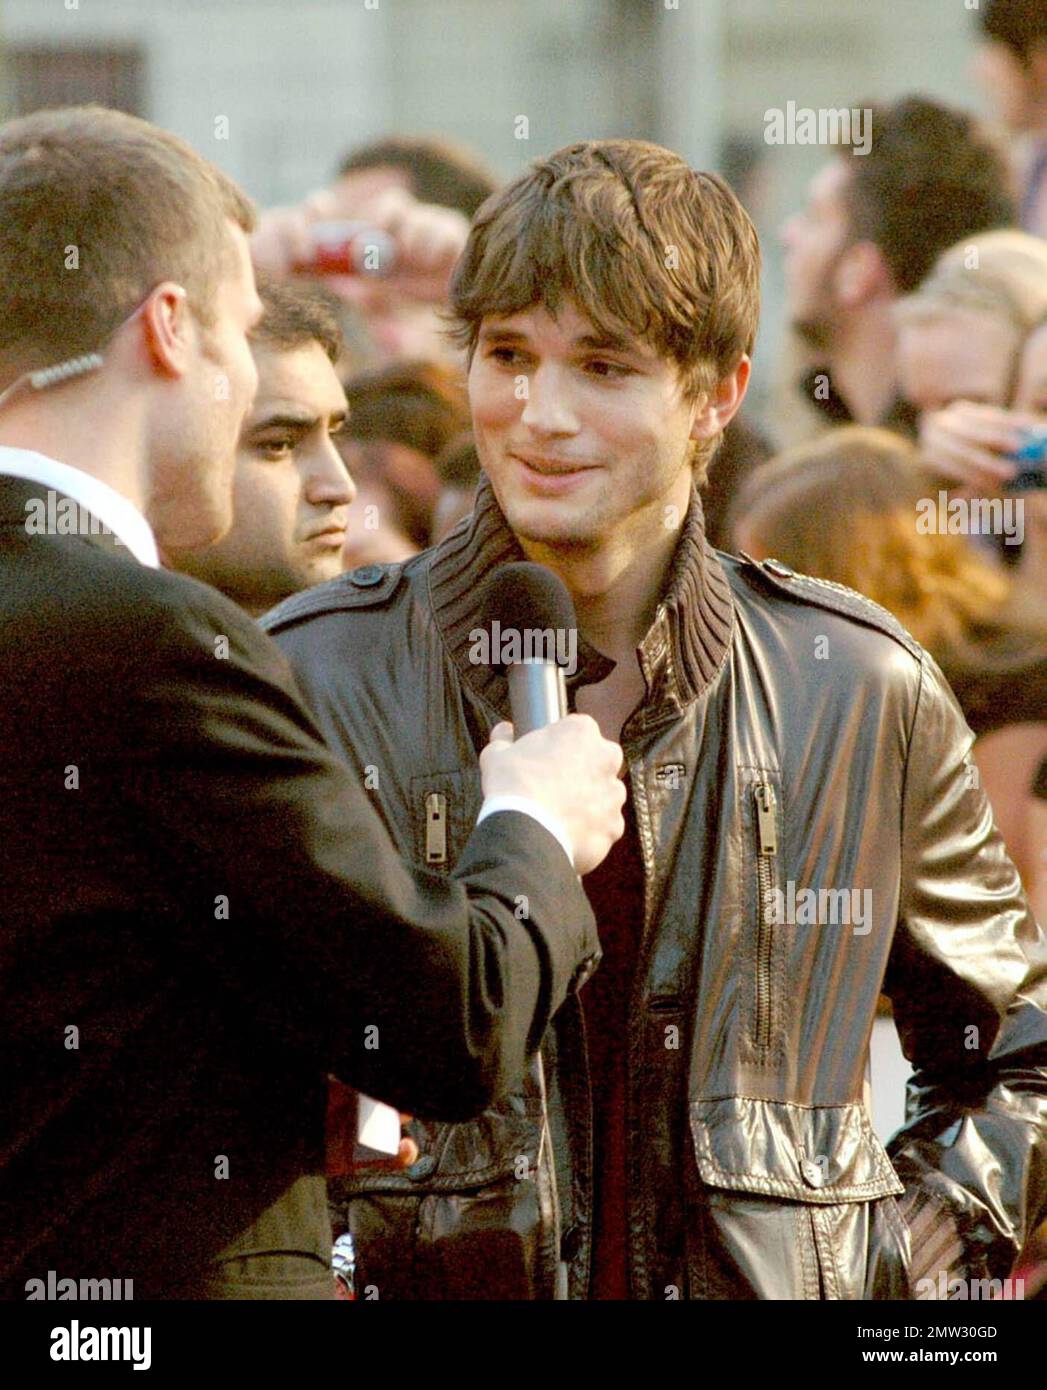 Ashton Kutcher attends the London premiere of 'What Happens in Vegas' at the Odeon Leicester Square. London, UK. 4/22/08. Stock Photo